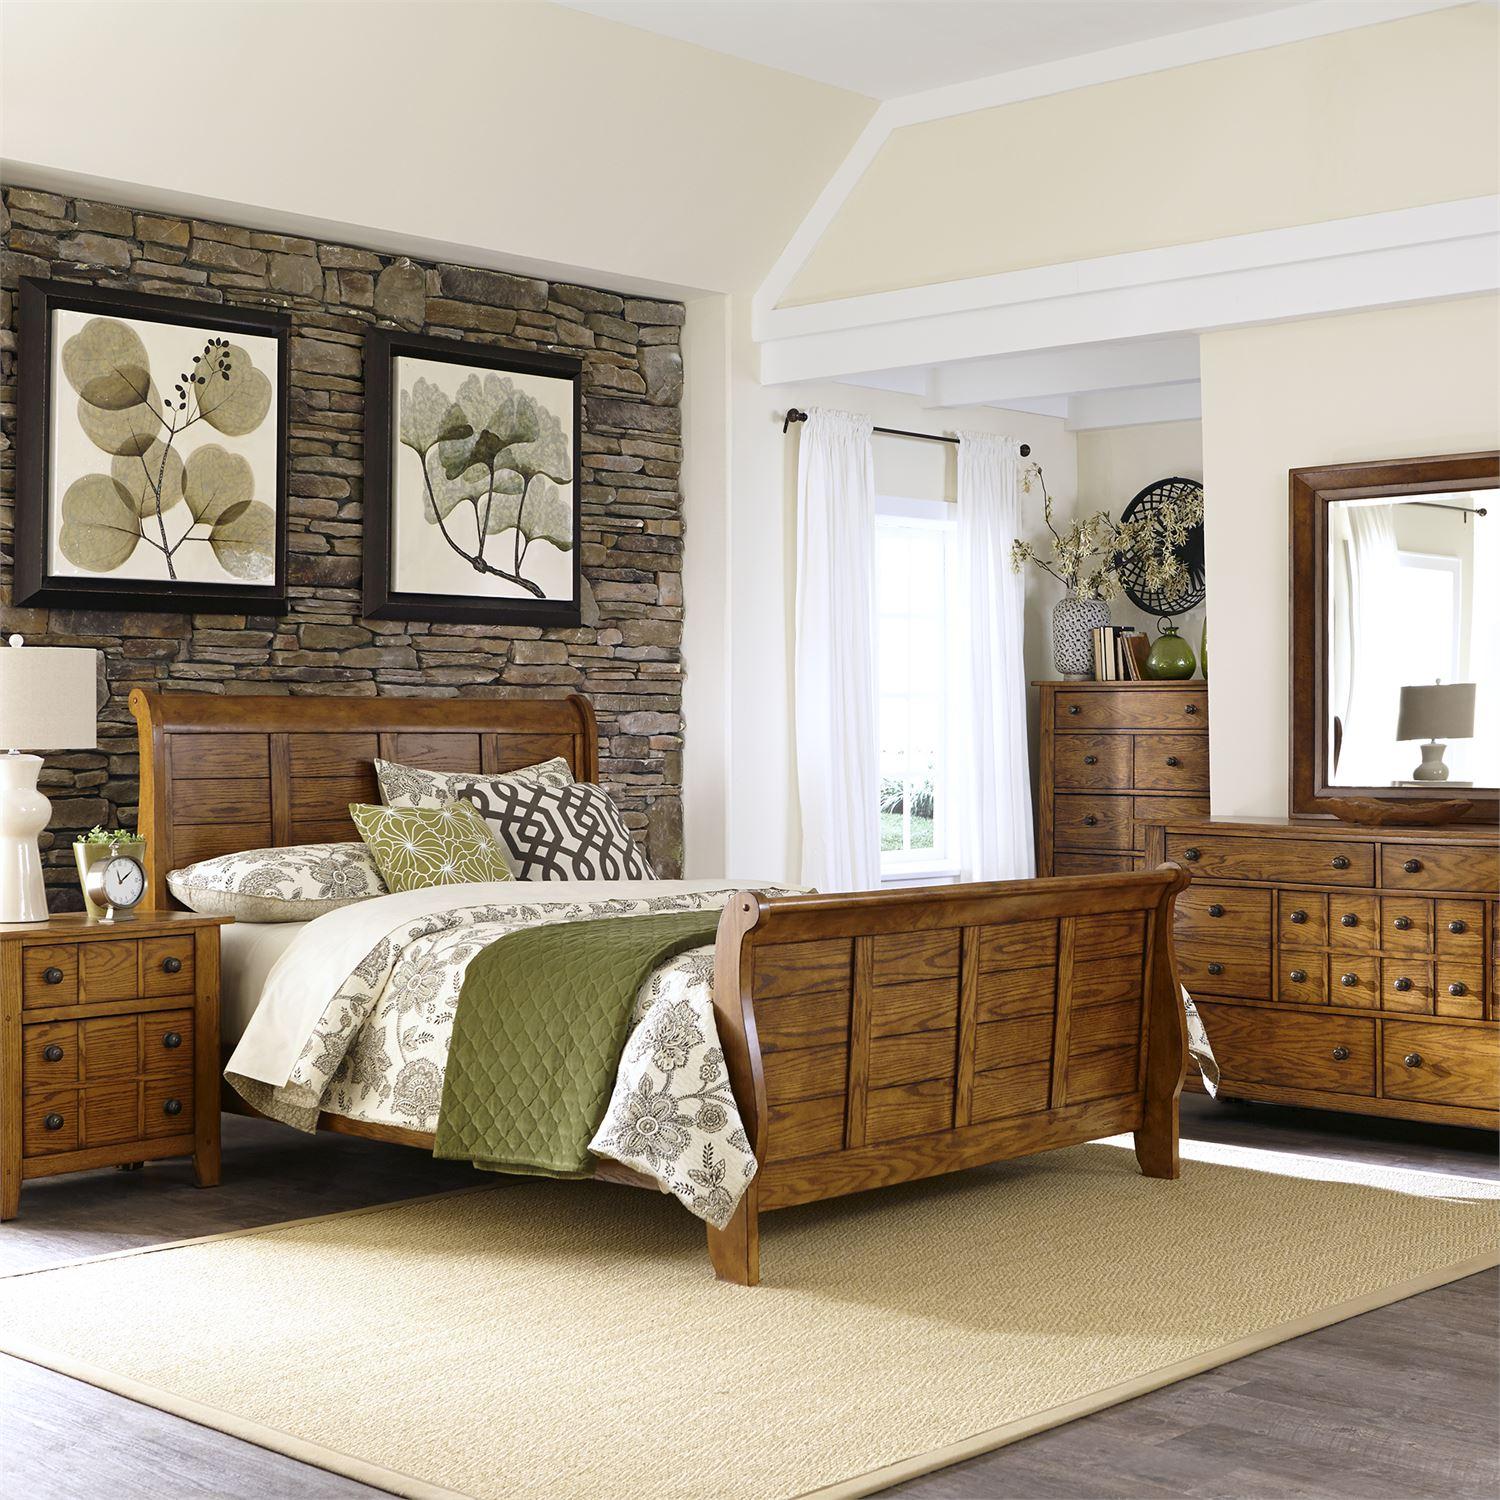 https://nyfurnitureoutlets.com/products/brown-wood-queen-sleigh-bedroom-set-5pc-grandpas-cabin-175-br-liberty-furniture/1x1/184500-1-390823141601.jpg